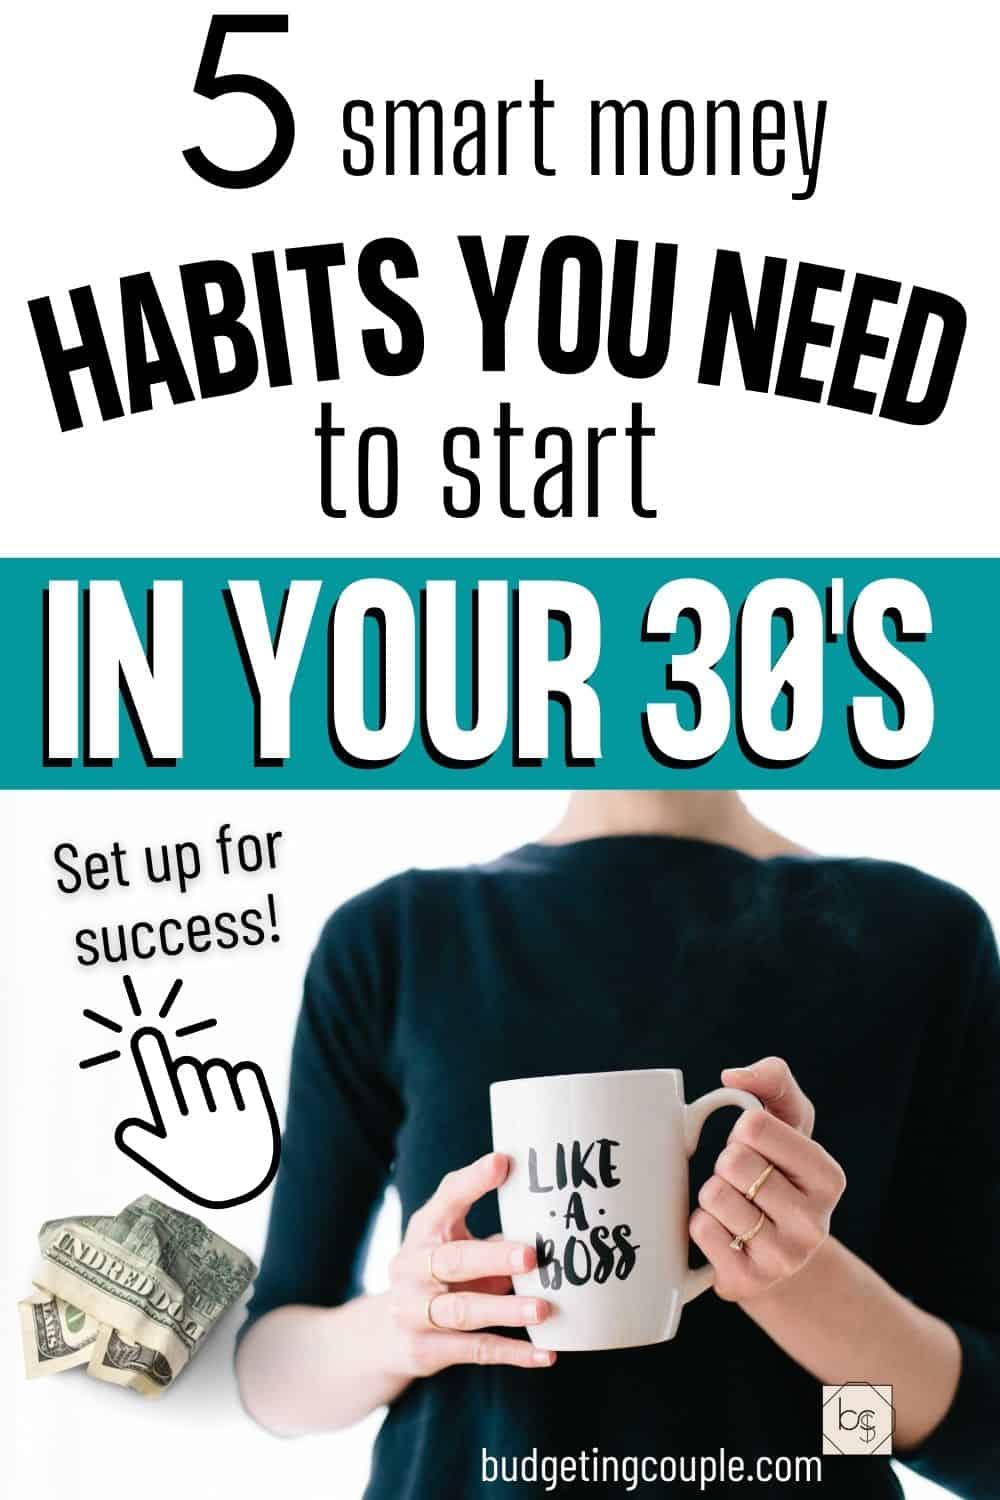 financial habits for 30s